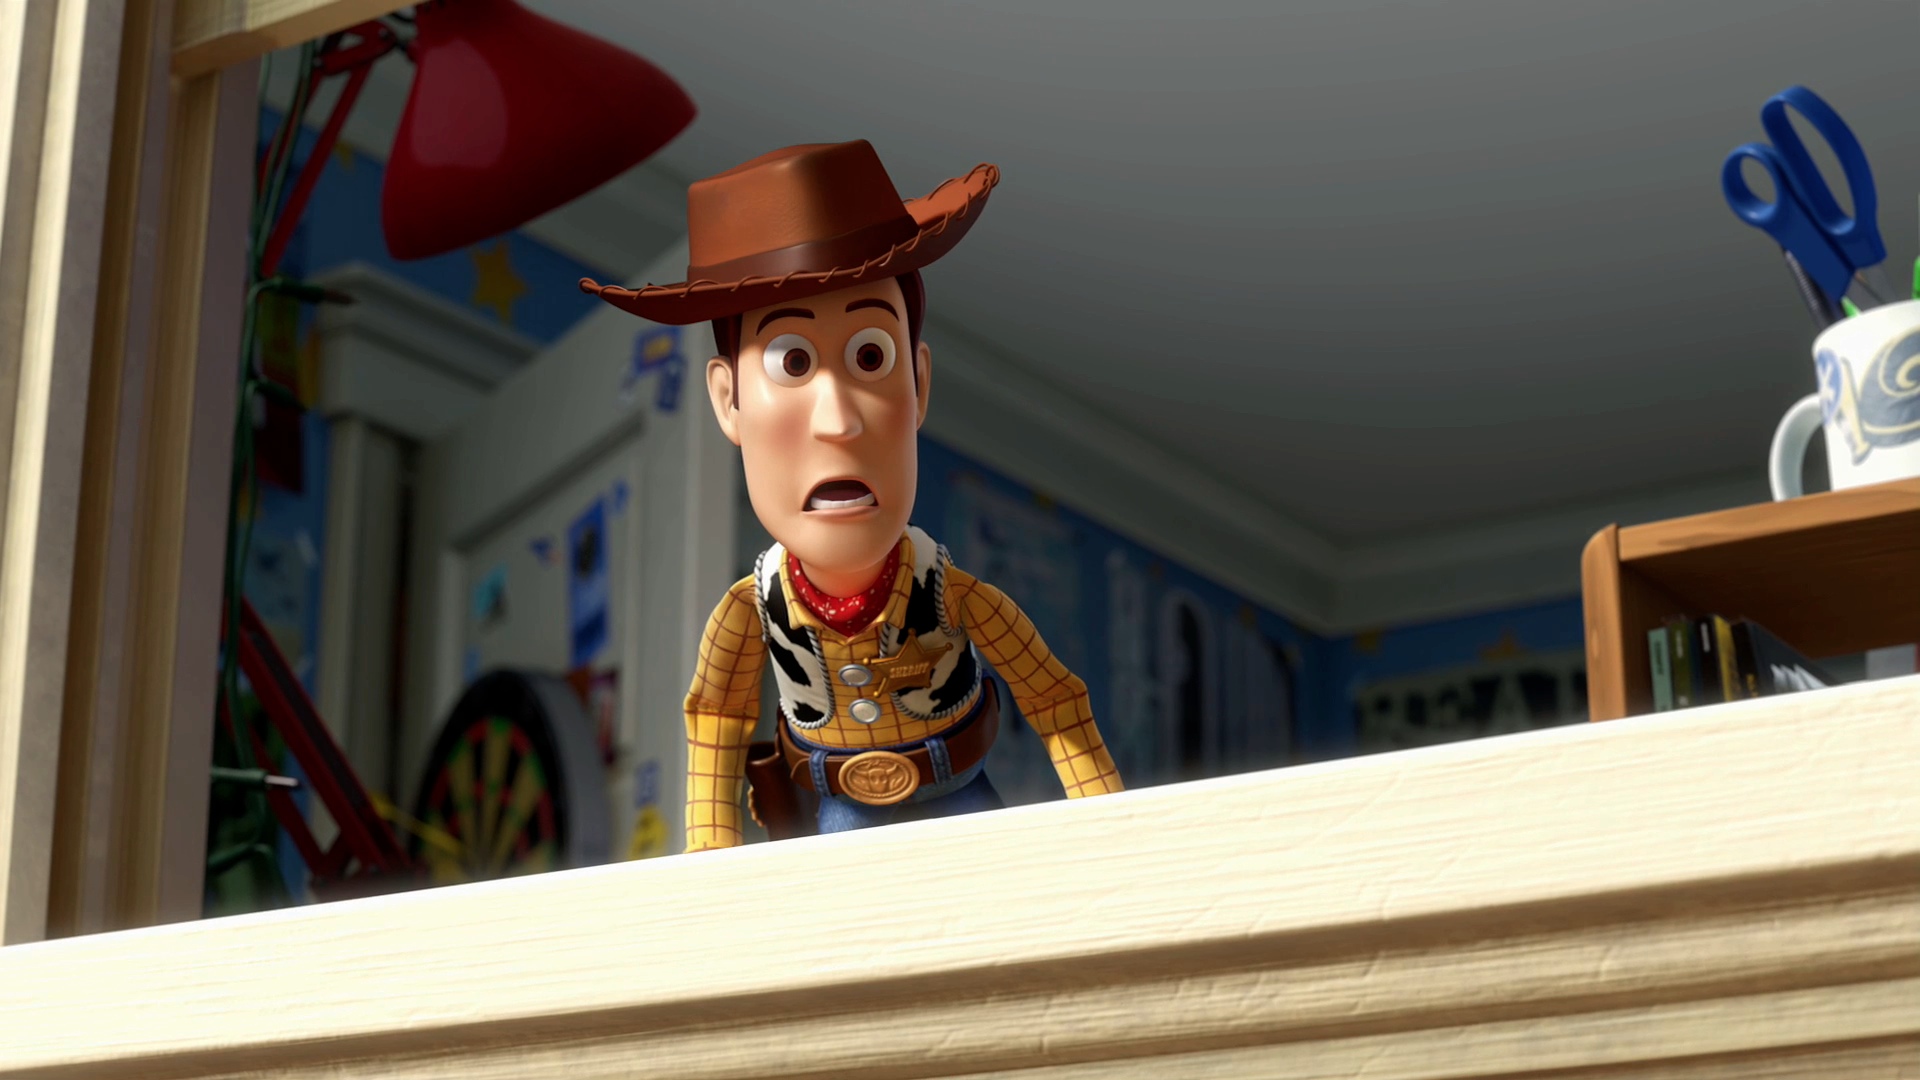 Toy Story 3 Full HD Wallpaper and Background Image | 1920x1080 | ID:333905